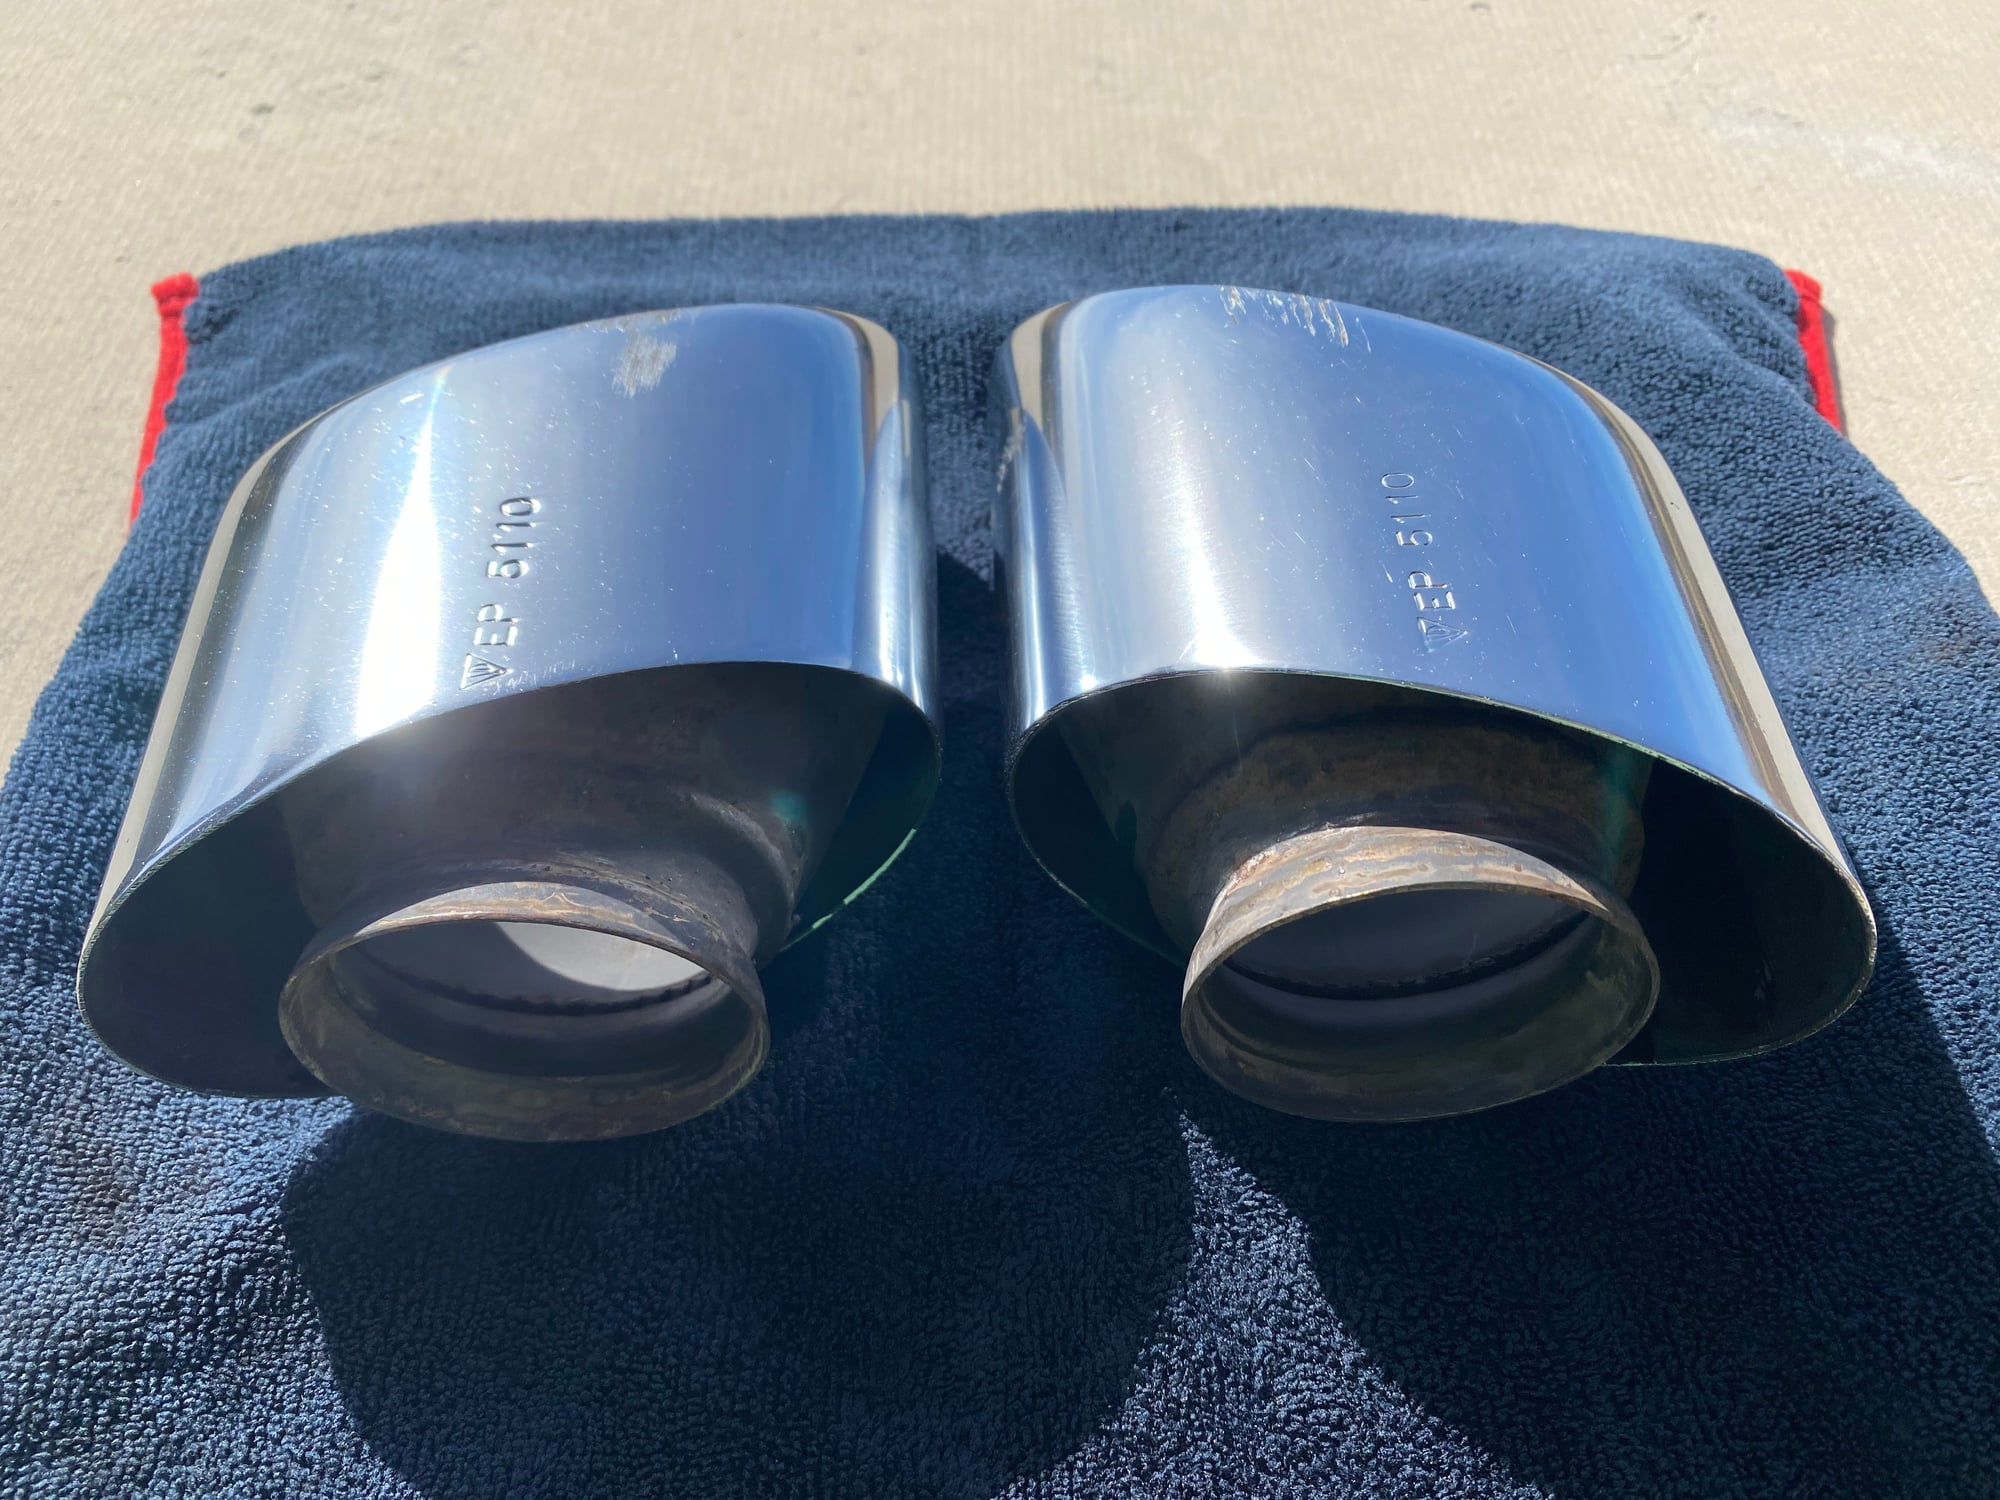 Engine - Exhaust - EP5110 Wide Oval Exhaust Tips for NB 993 - Used - 1995 to 1998 Porsche 911 - Park City, UT 84098, United States